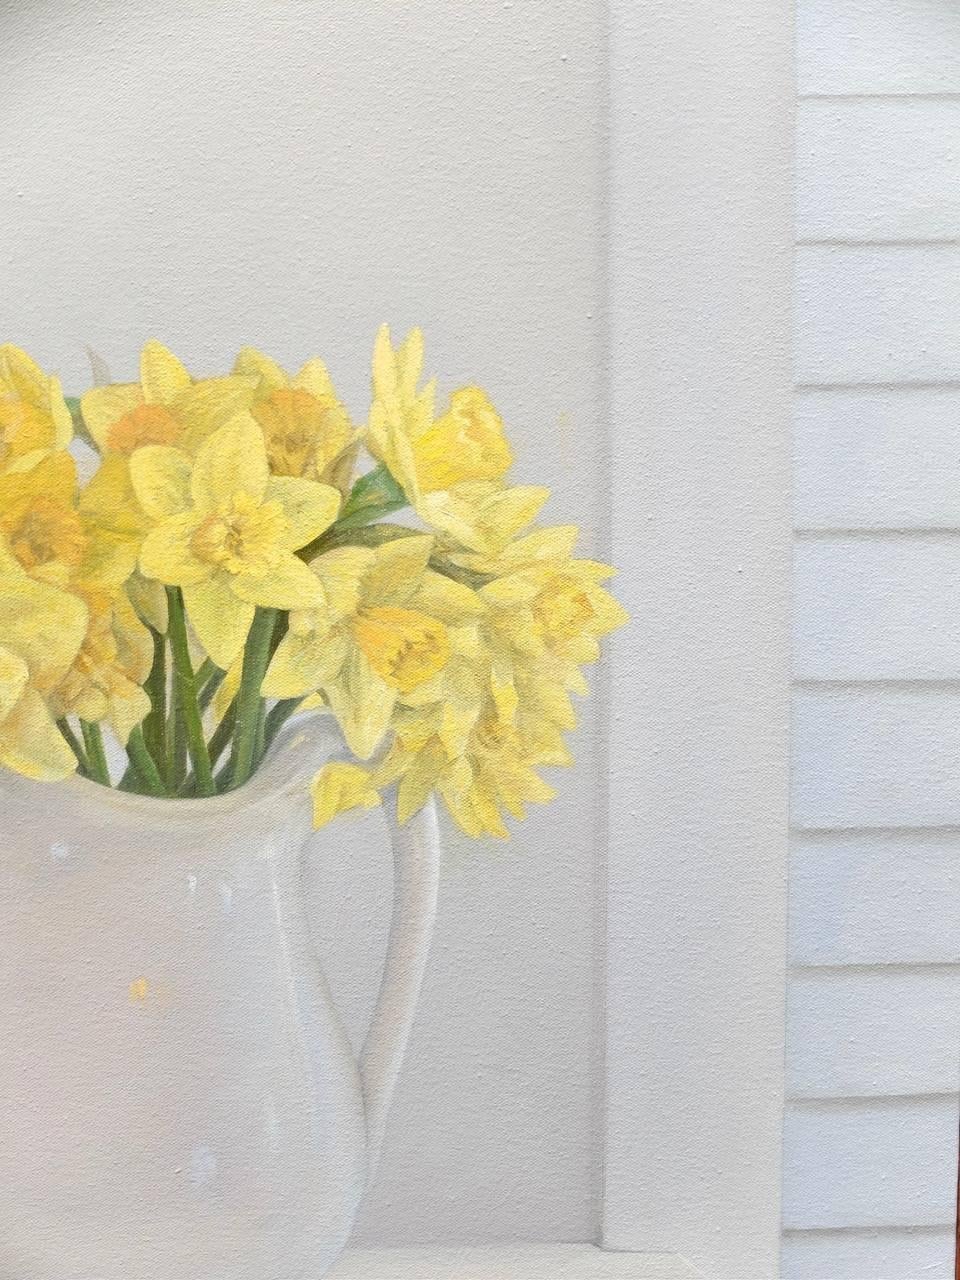 Daffodils / oil on canvas - Painting by Willard Dixon